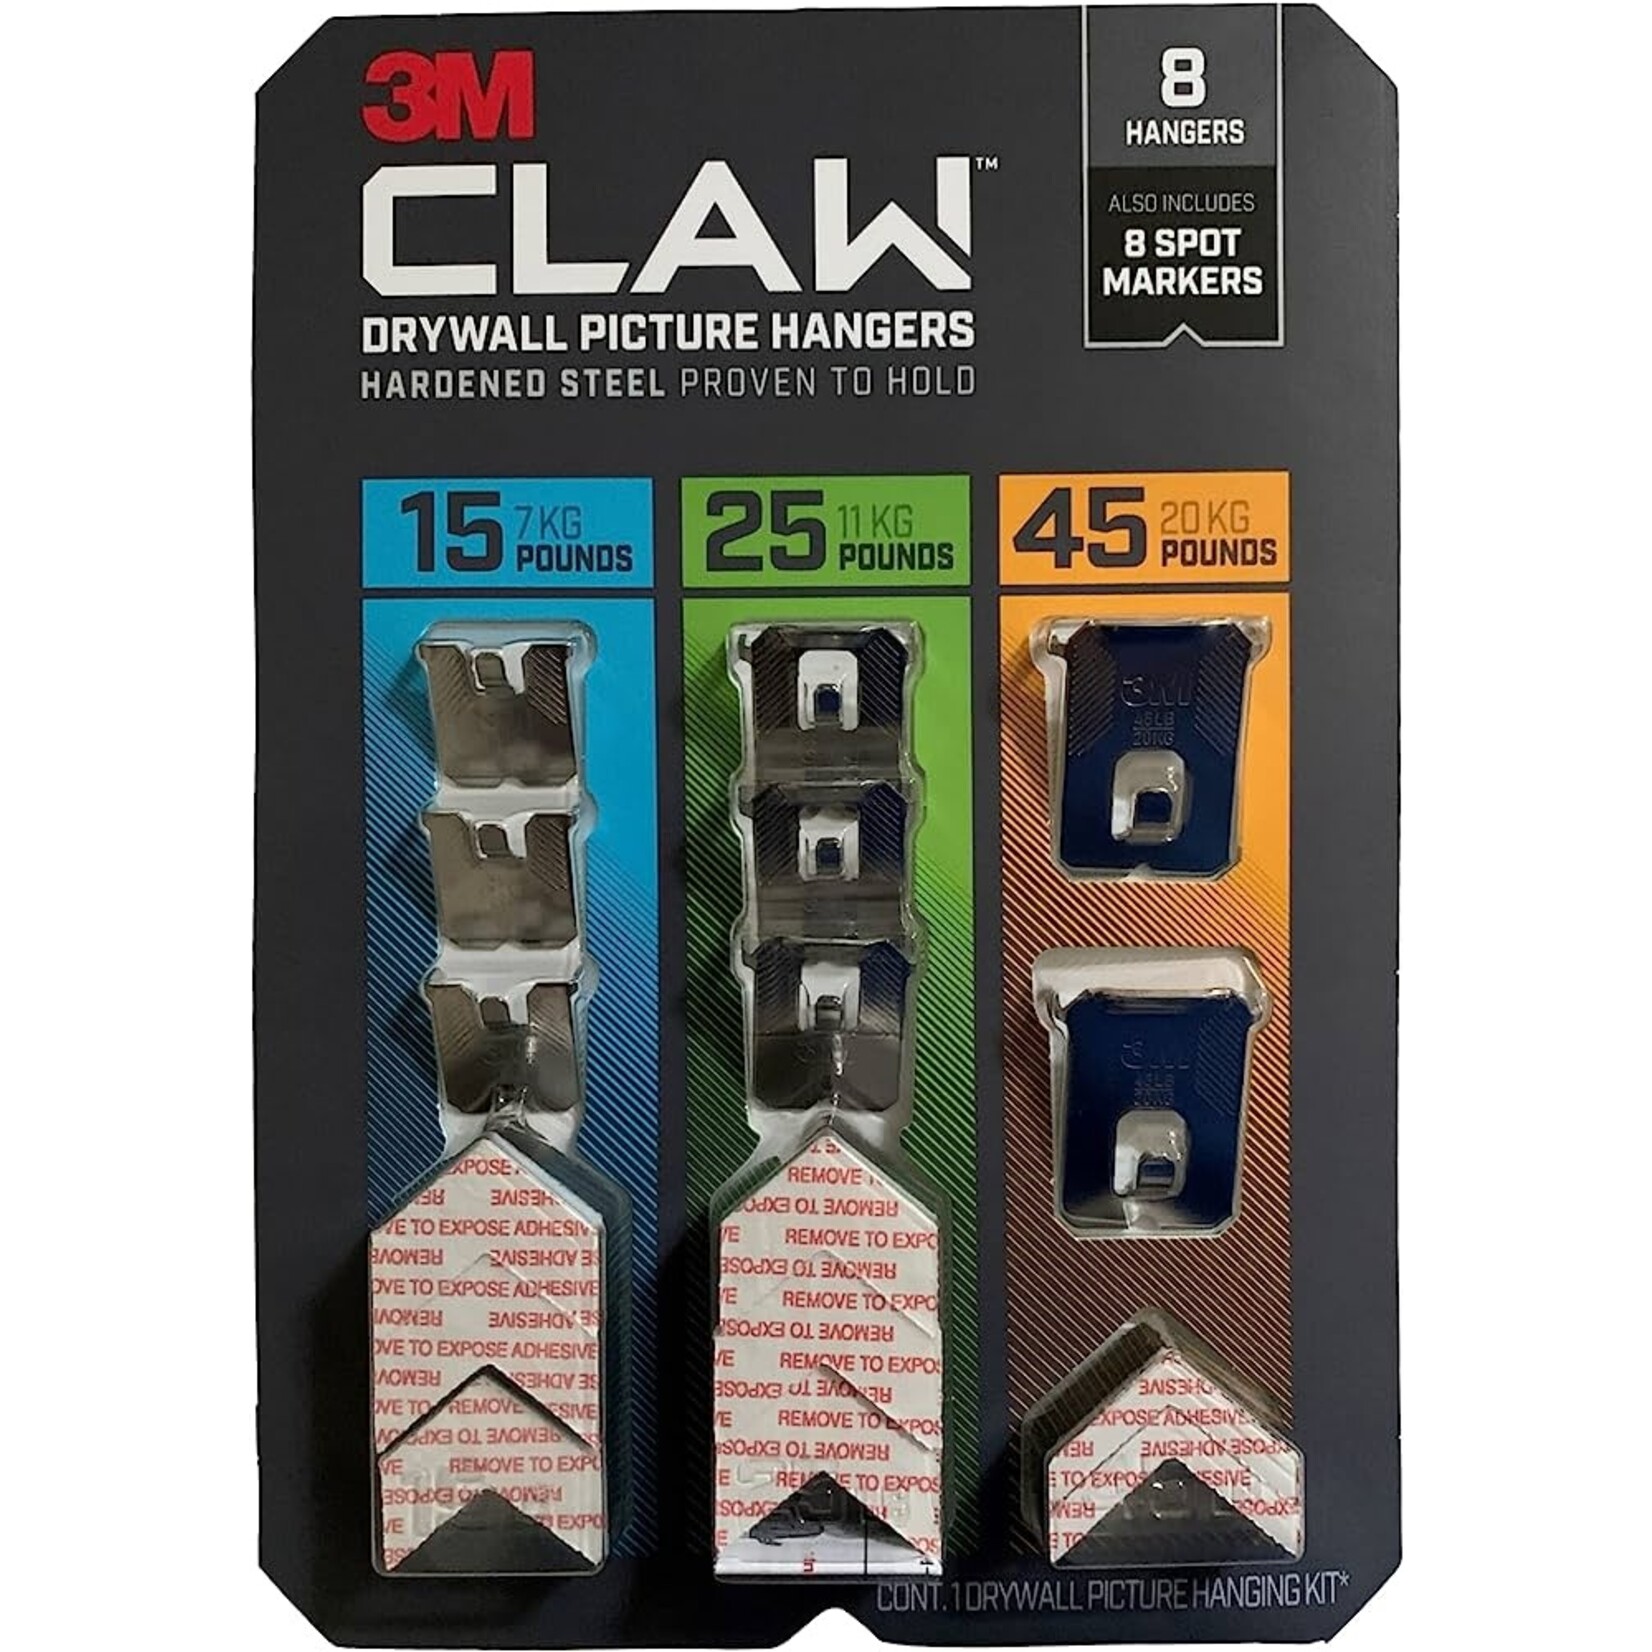 3m claw drywall picture hangers